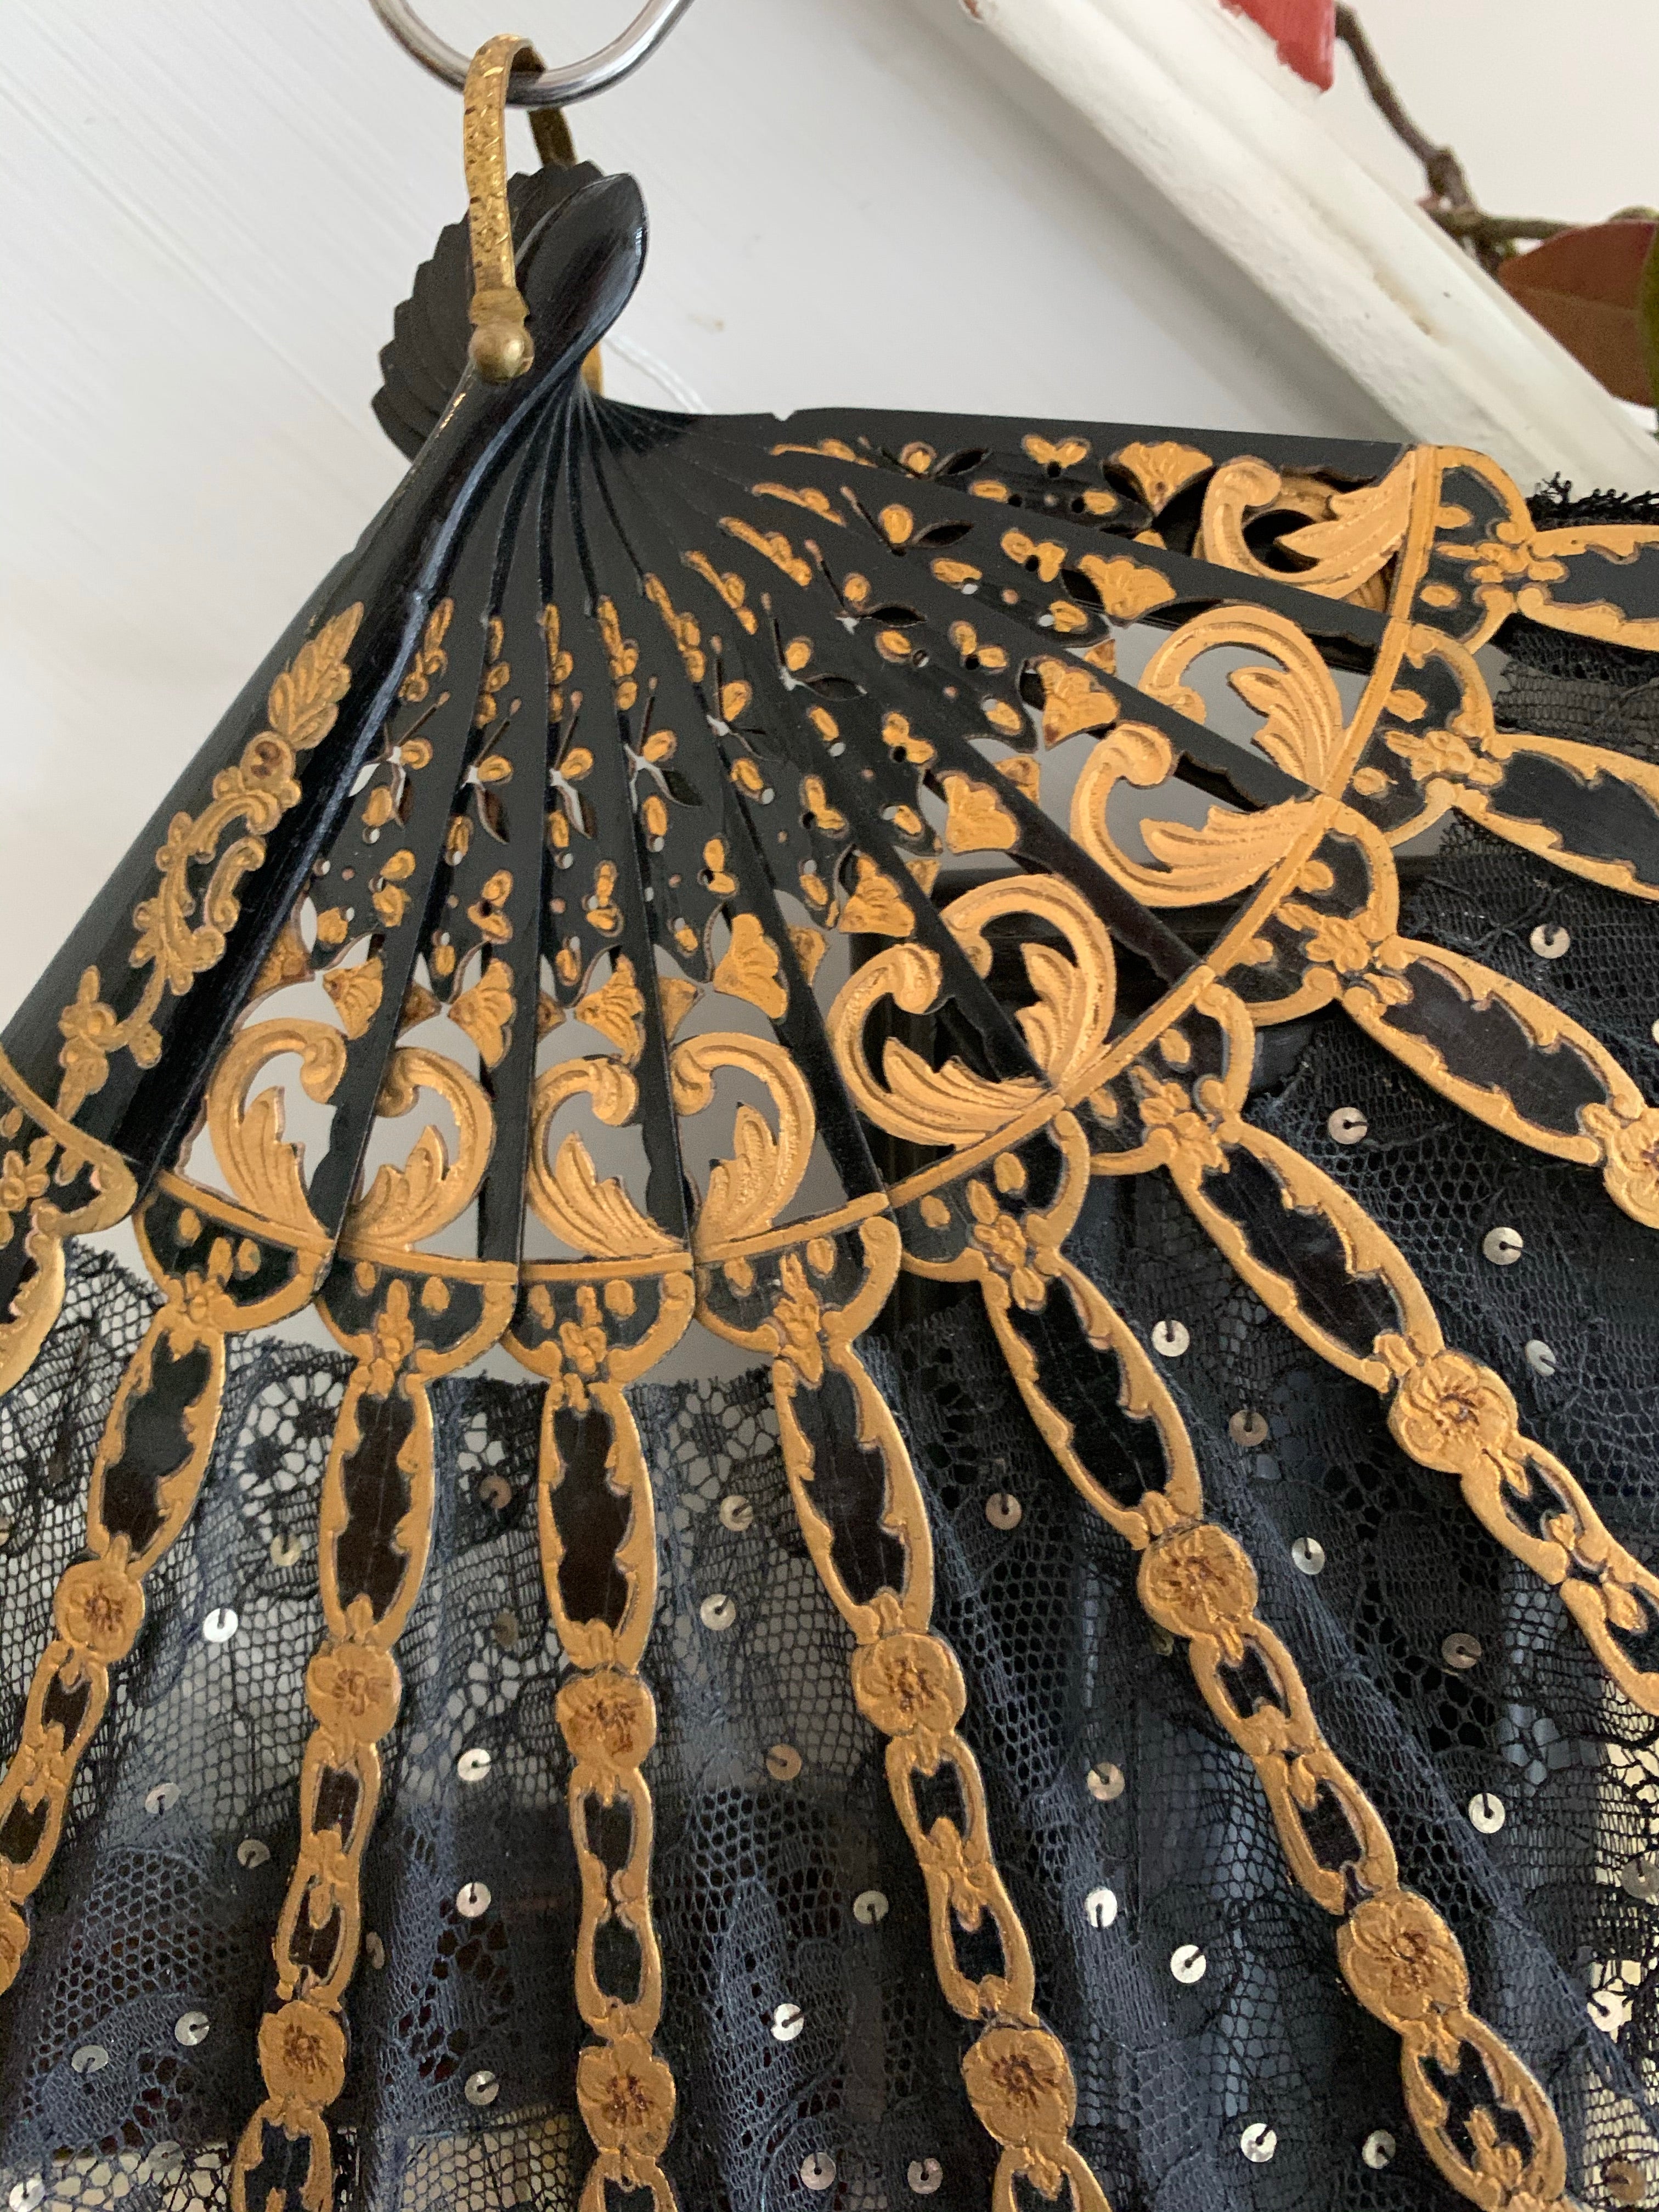 Black Lace, Gold and Sequin Fan